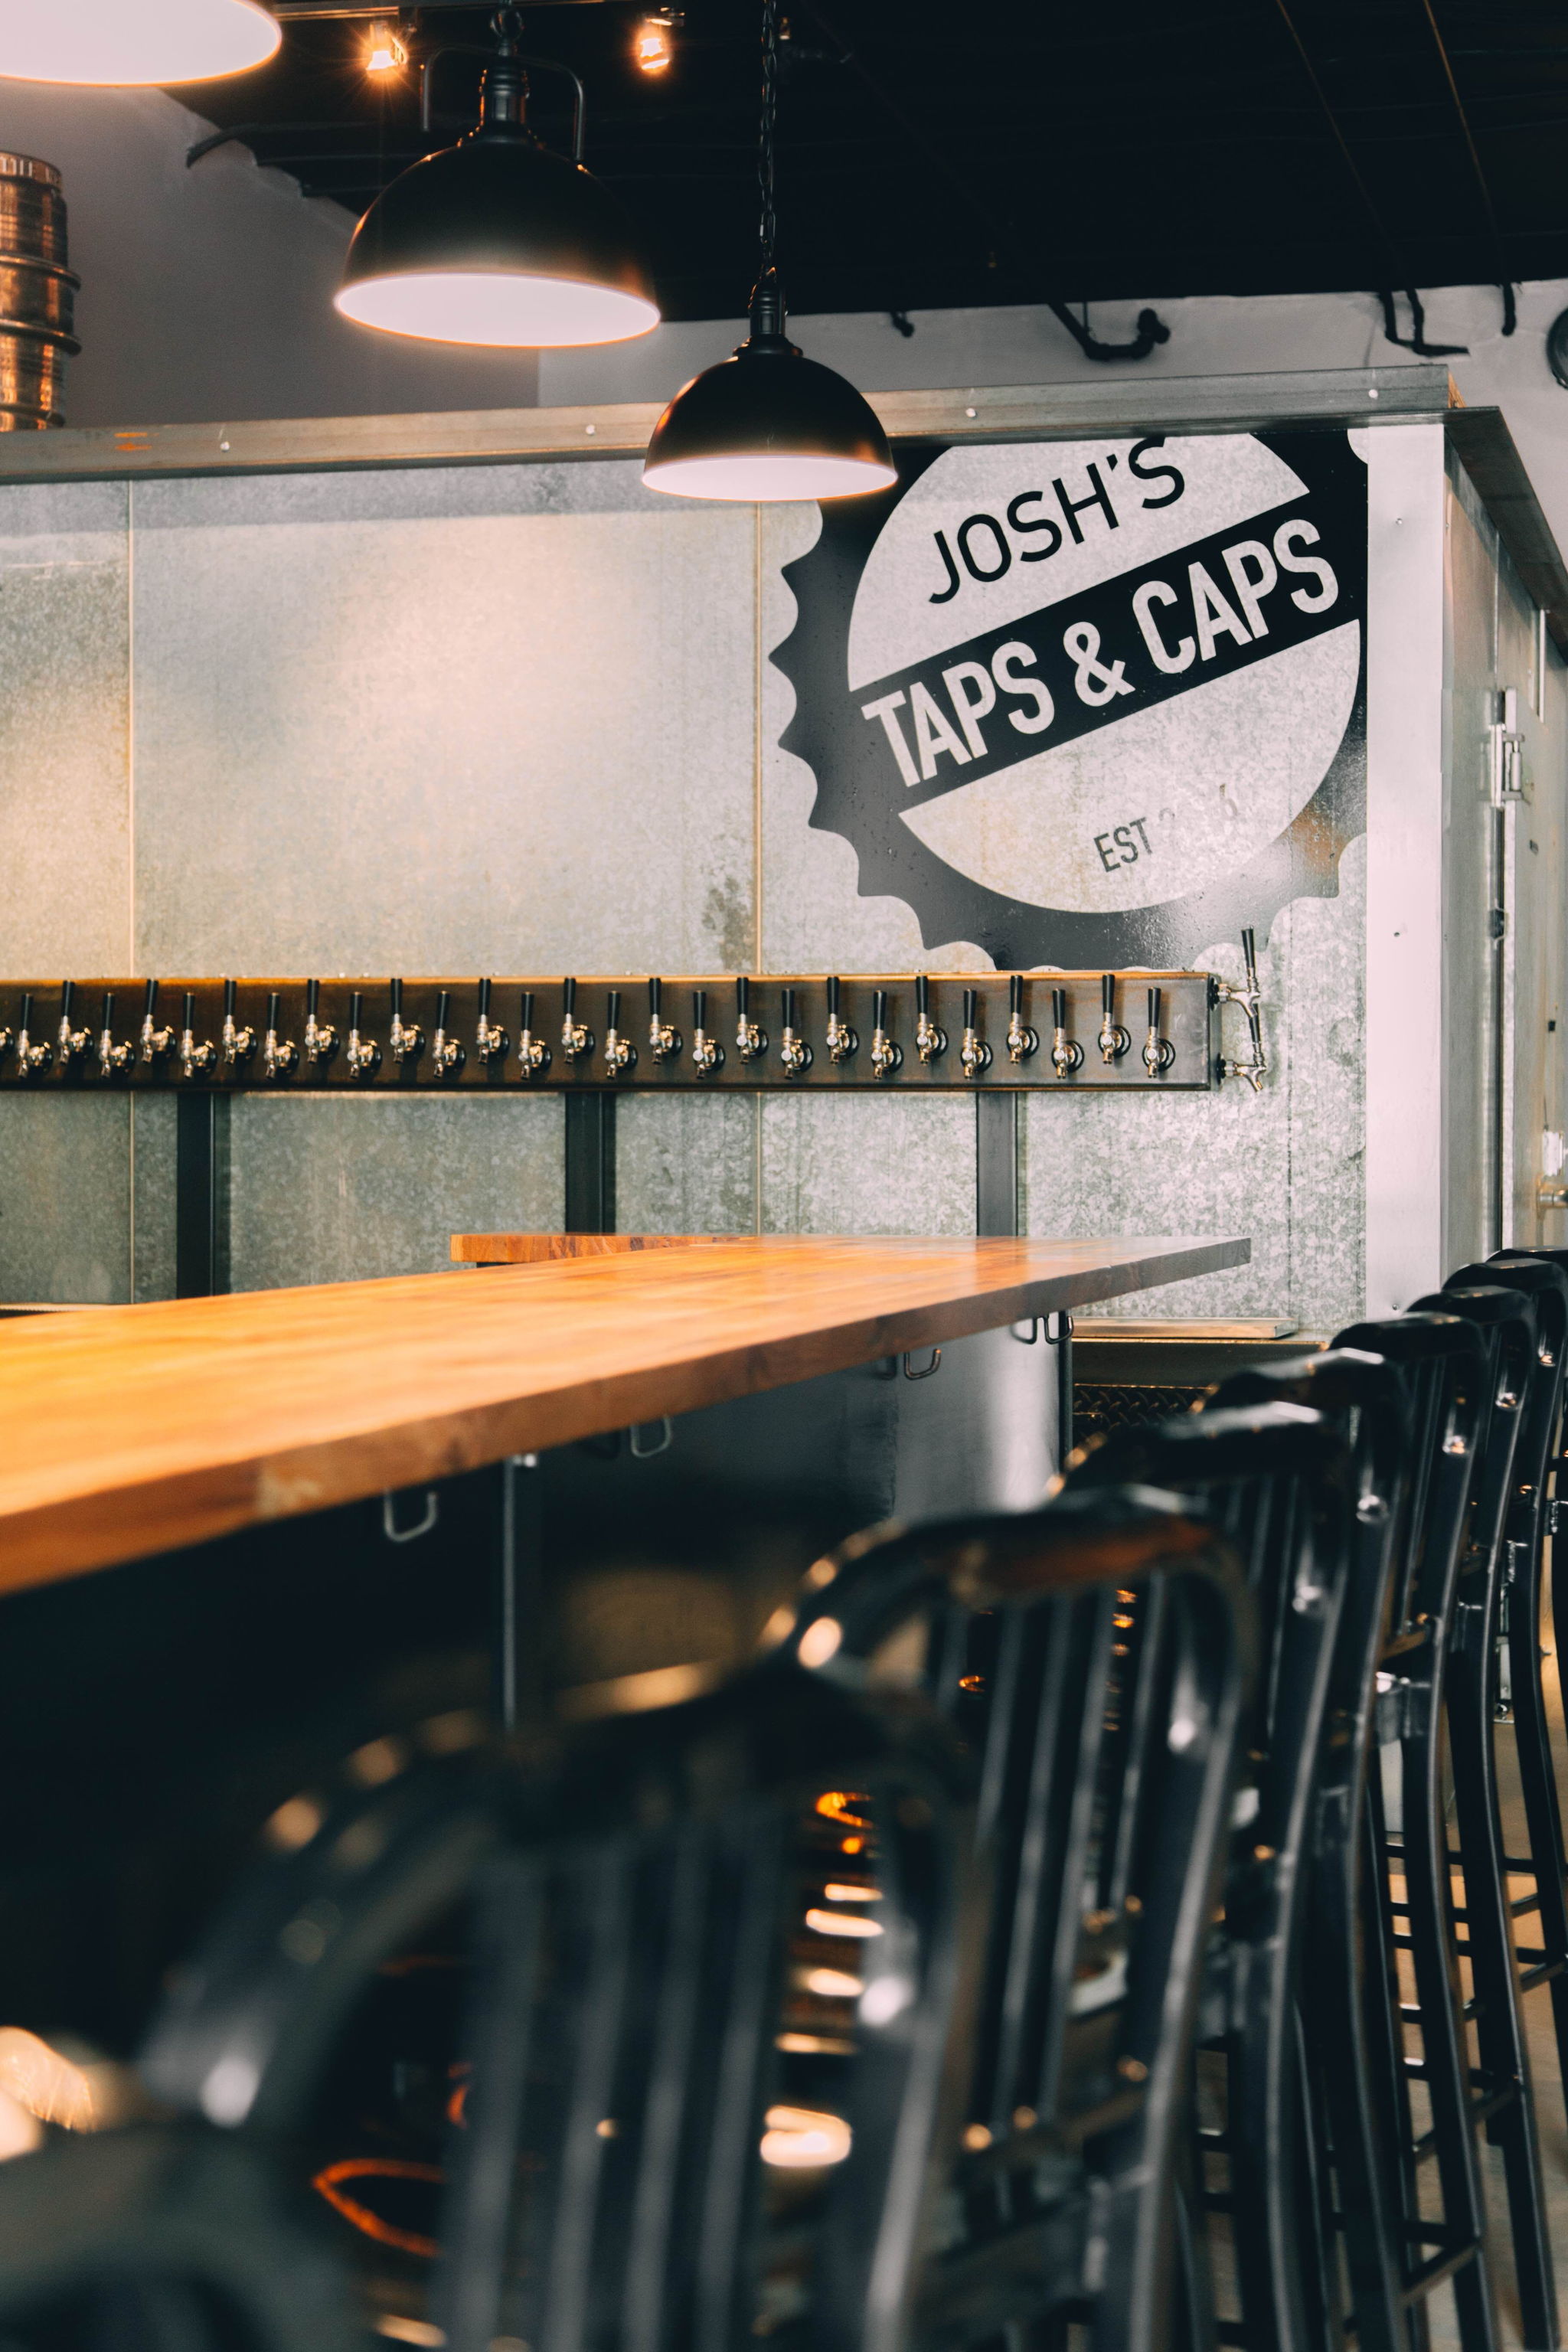 Josh’s Taps & Caps has opened in Snohomish offering a lineup of draft and bottled beers and wine.